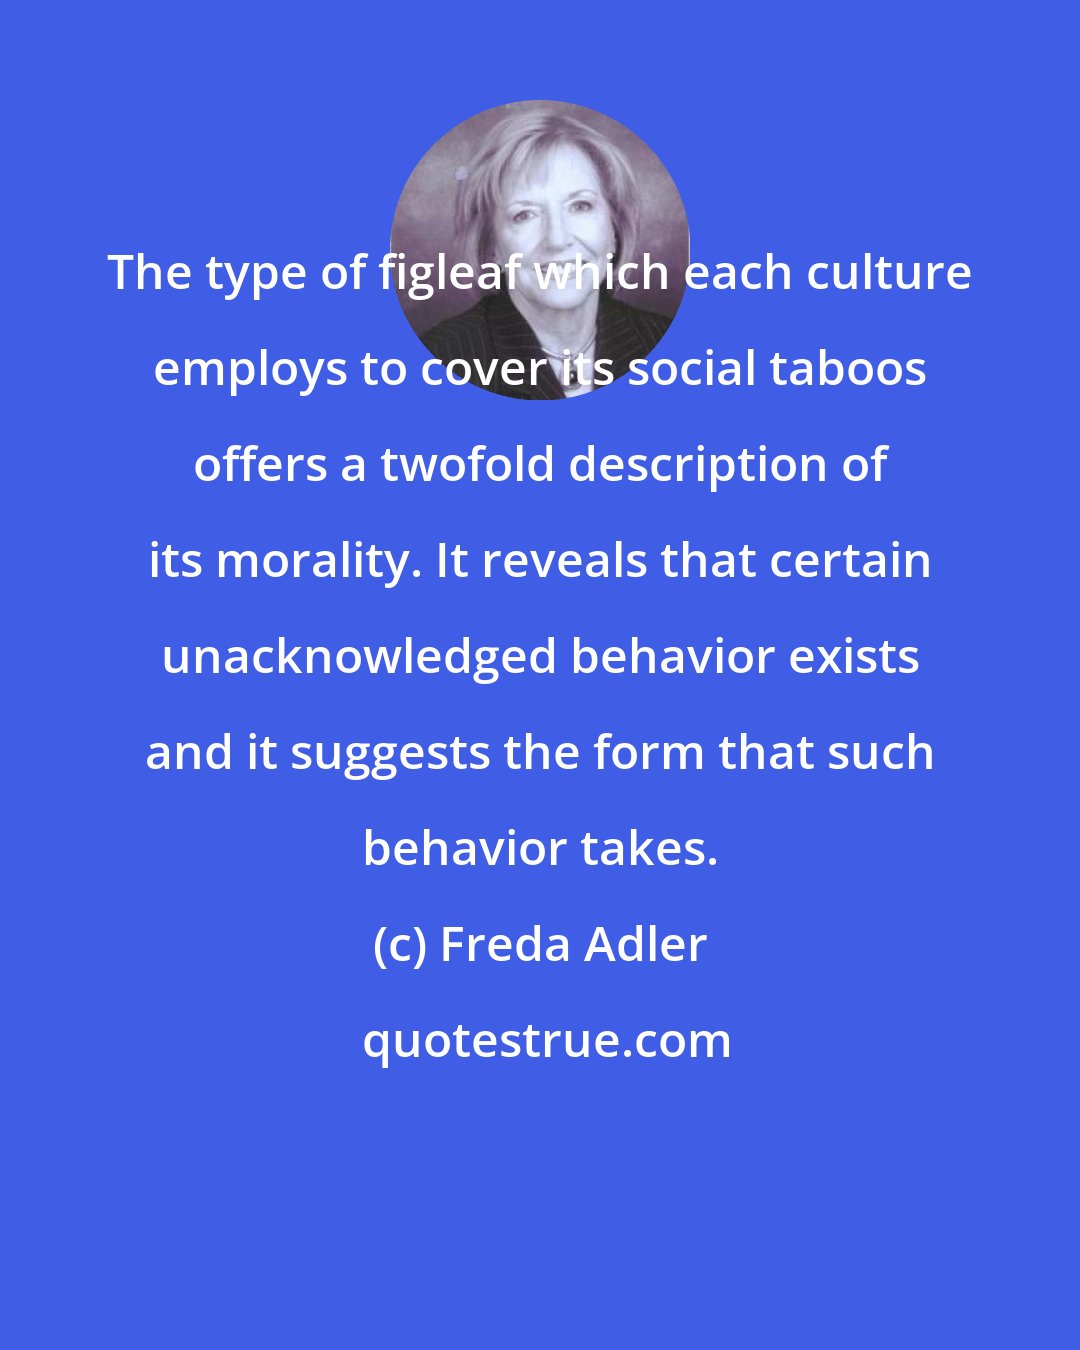 Freda Adler: The type of figleaf which each culture employs to cover its social taboos offers a twofold description of its morality. It reveals that certain unacknowledged behavior exists and it suggests the form that such behavior takes.